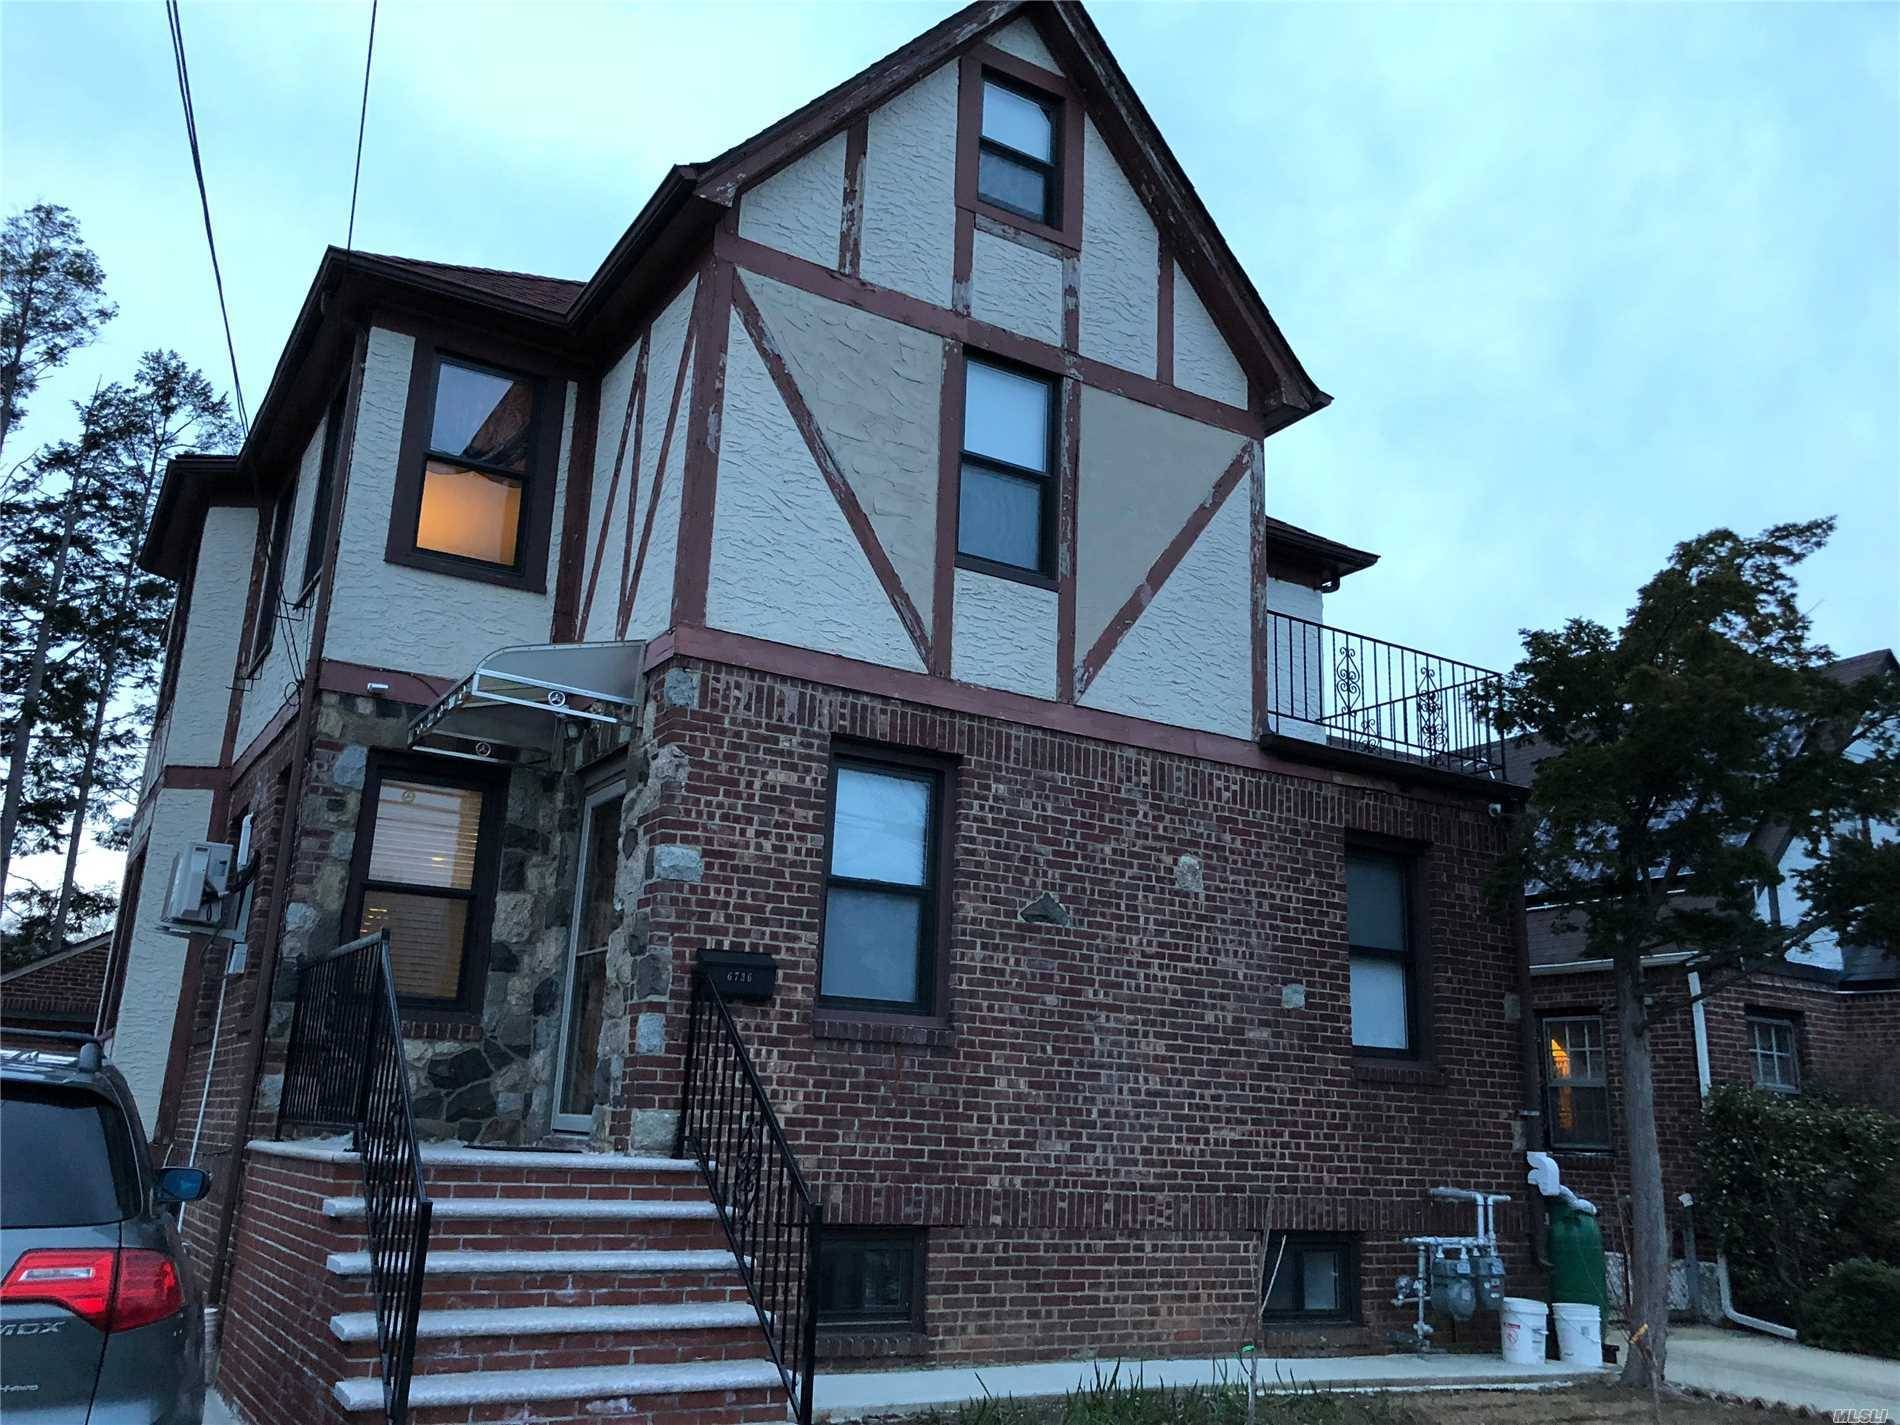 Beautiful 2 Family Brick Home Located In The Heart Of Fresh Meadows.